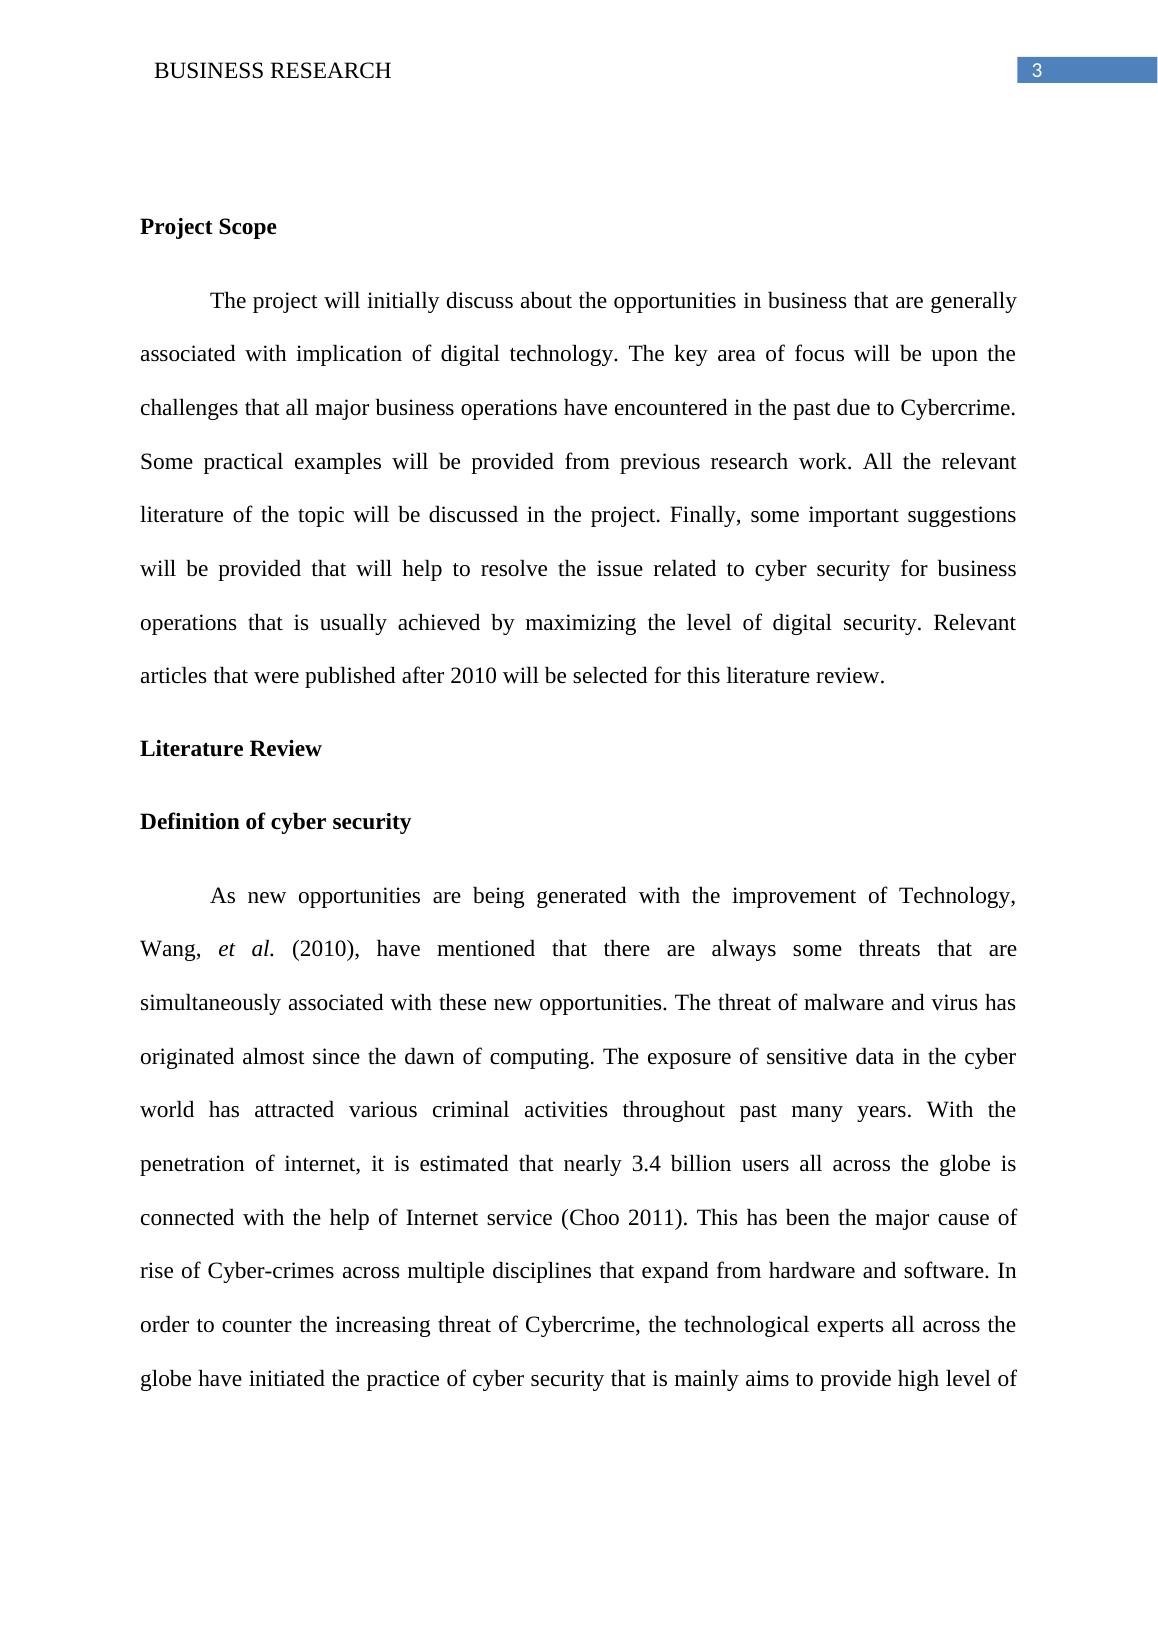 Cyber Security Project Scope 3 Research Project Scope 3 Literature Review_4